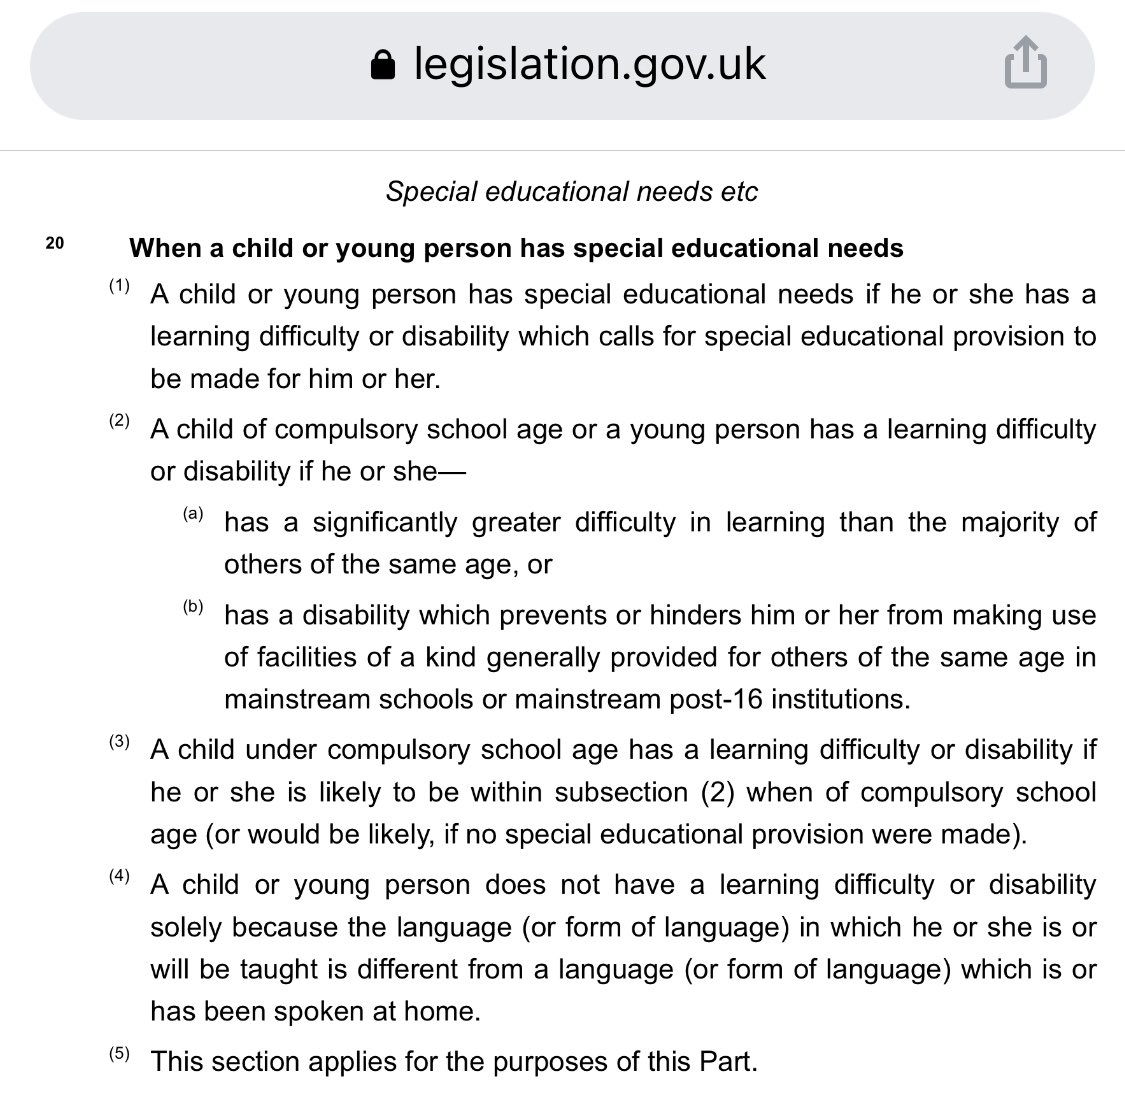 The Children and Families act 2014. Part 3, sections 20 and 21